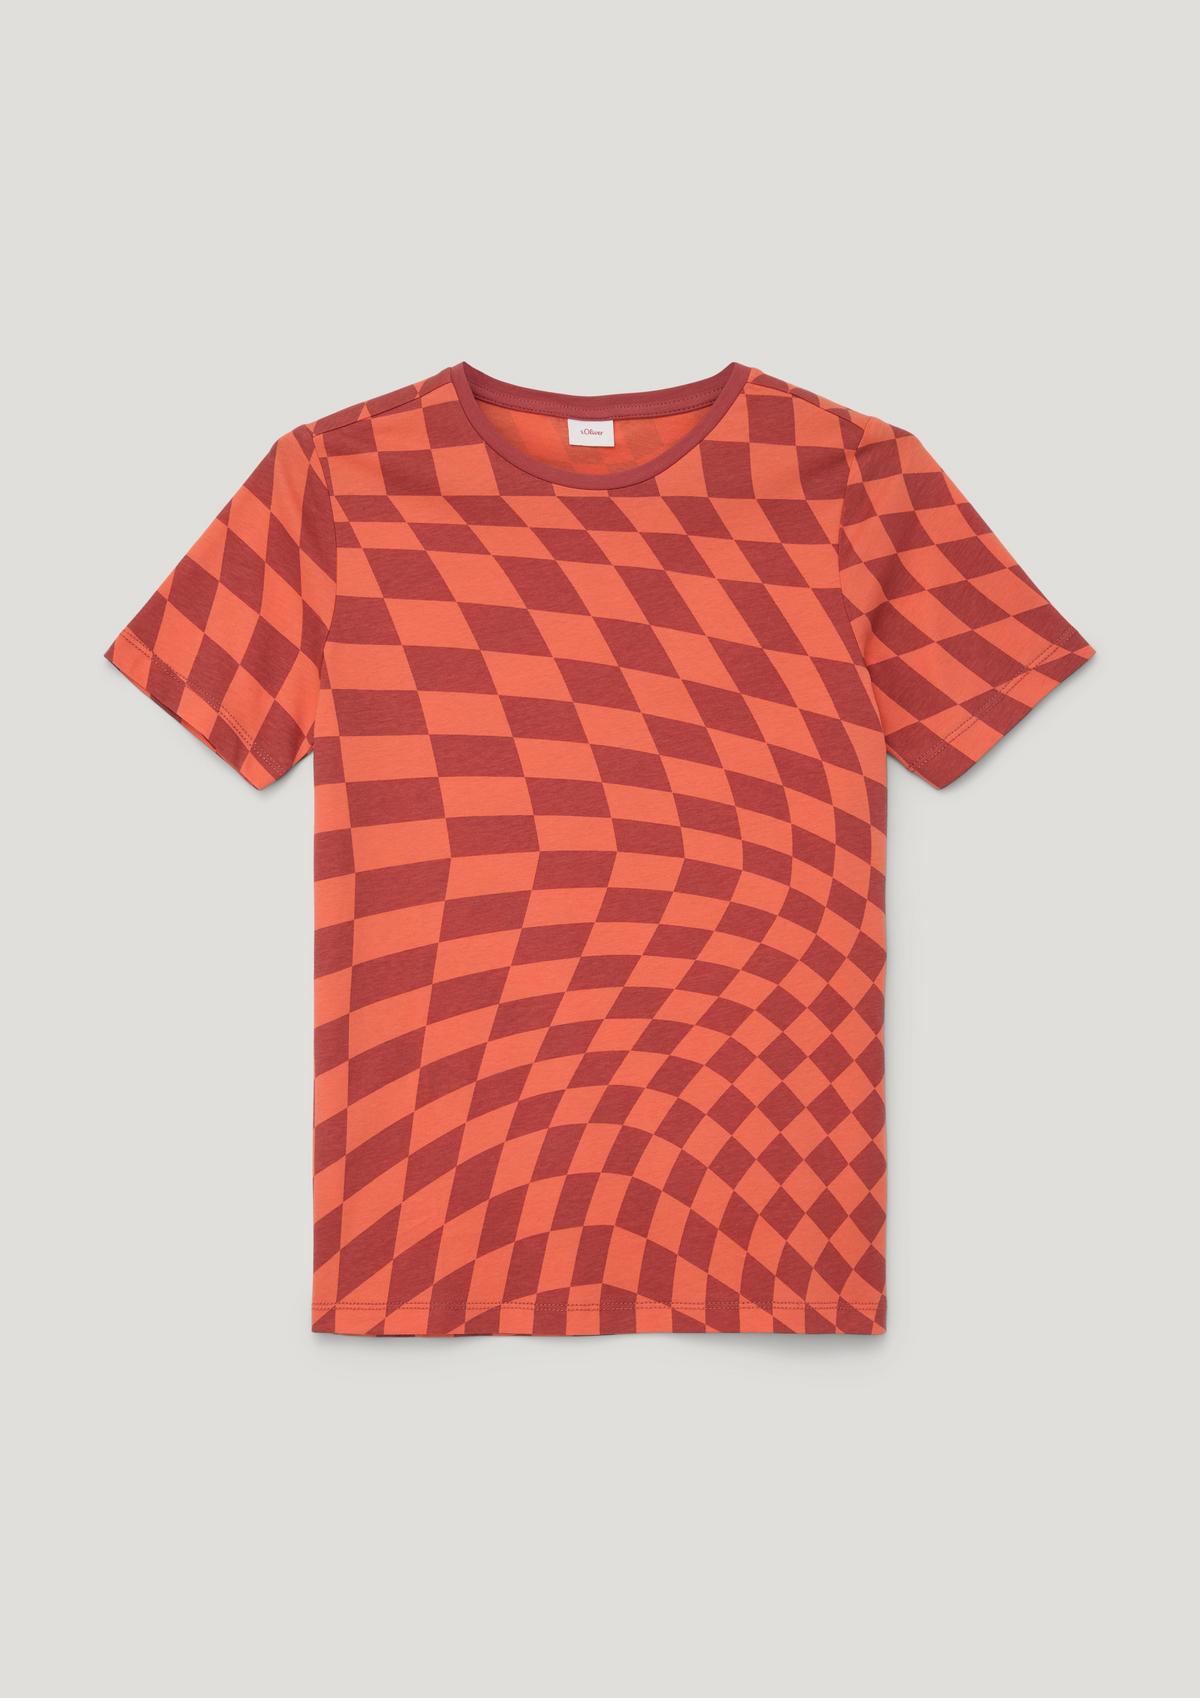 Jersey top with all-over orange - an print